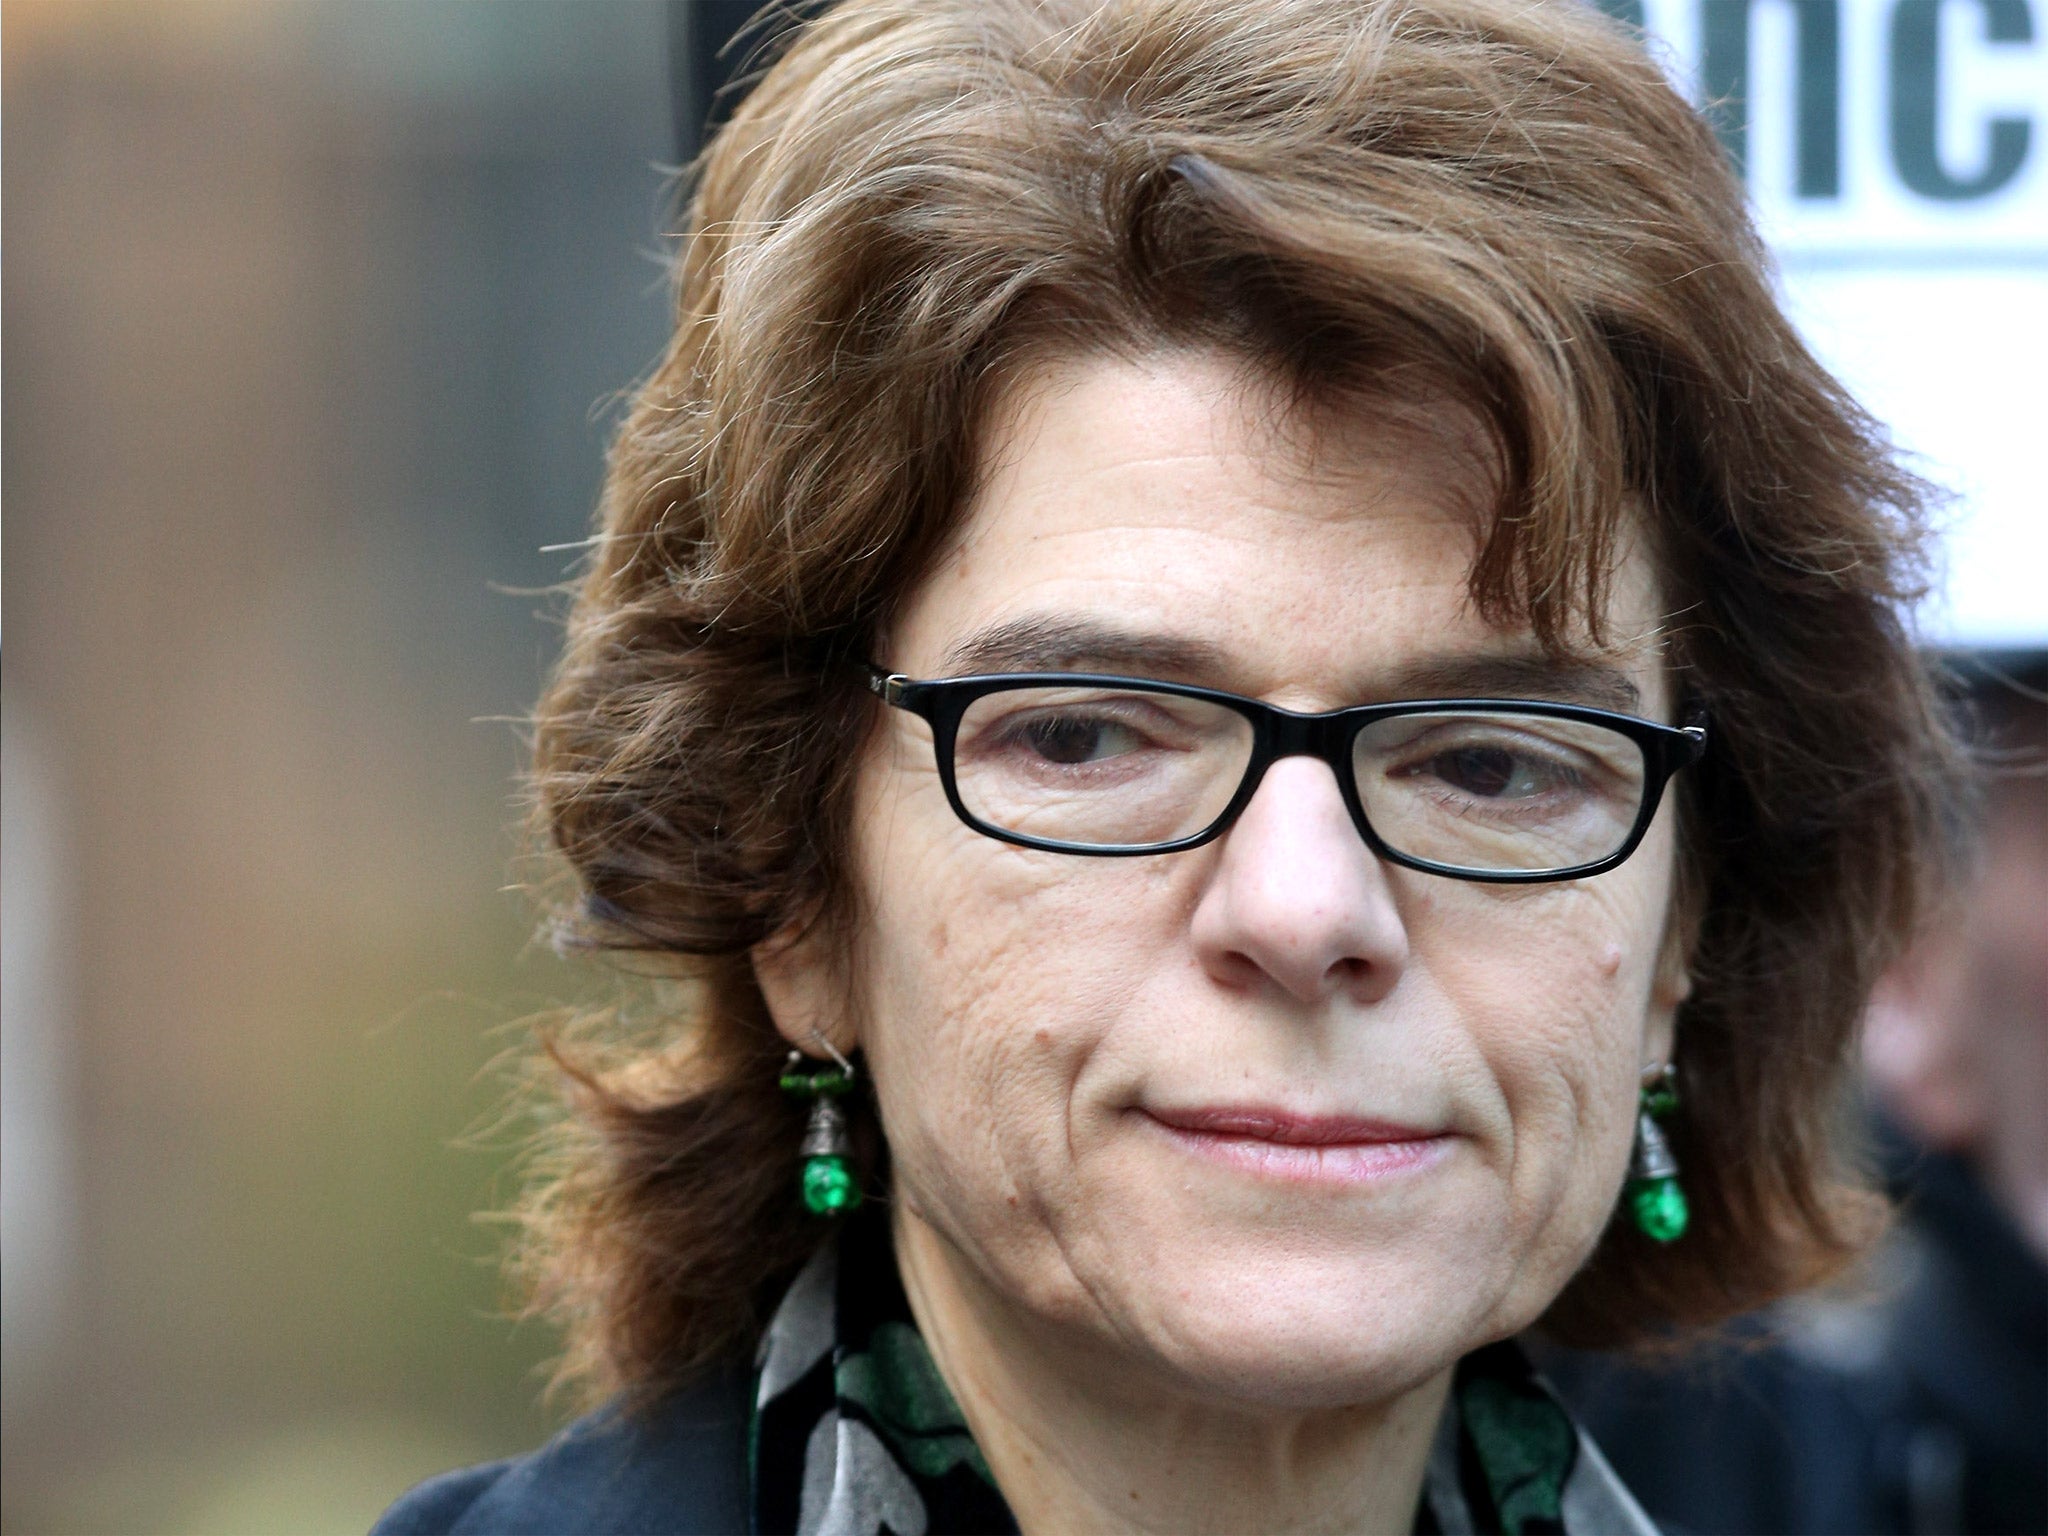 Vicky Pryce took her ex-husband’s penalty points for speeding